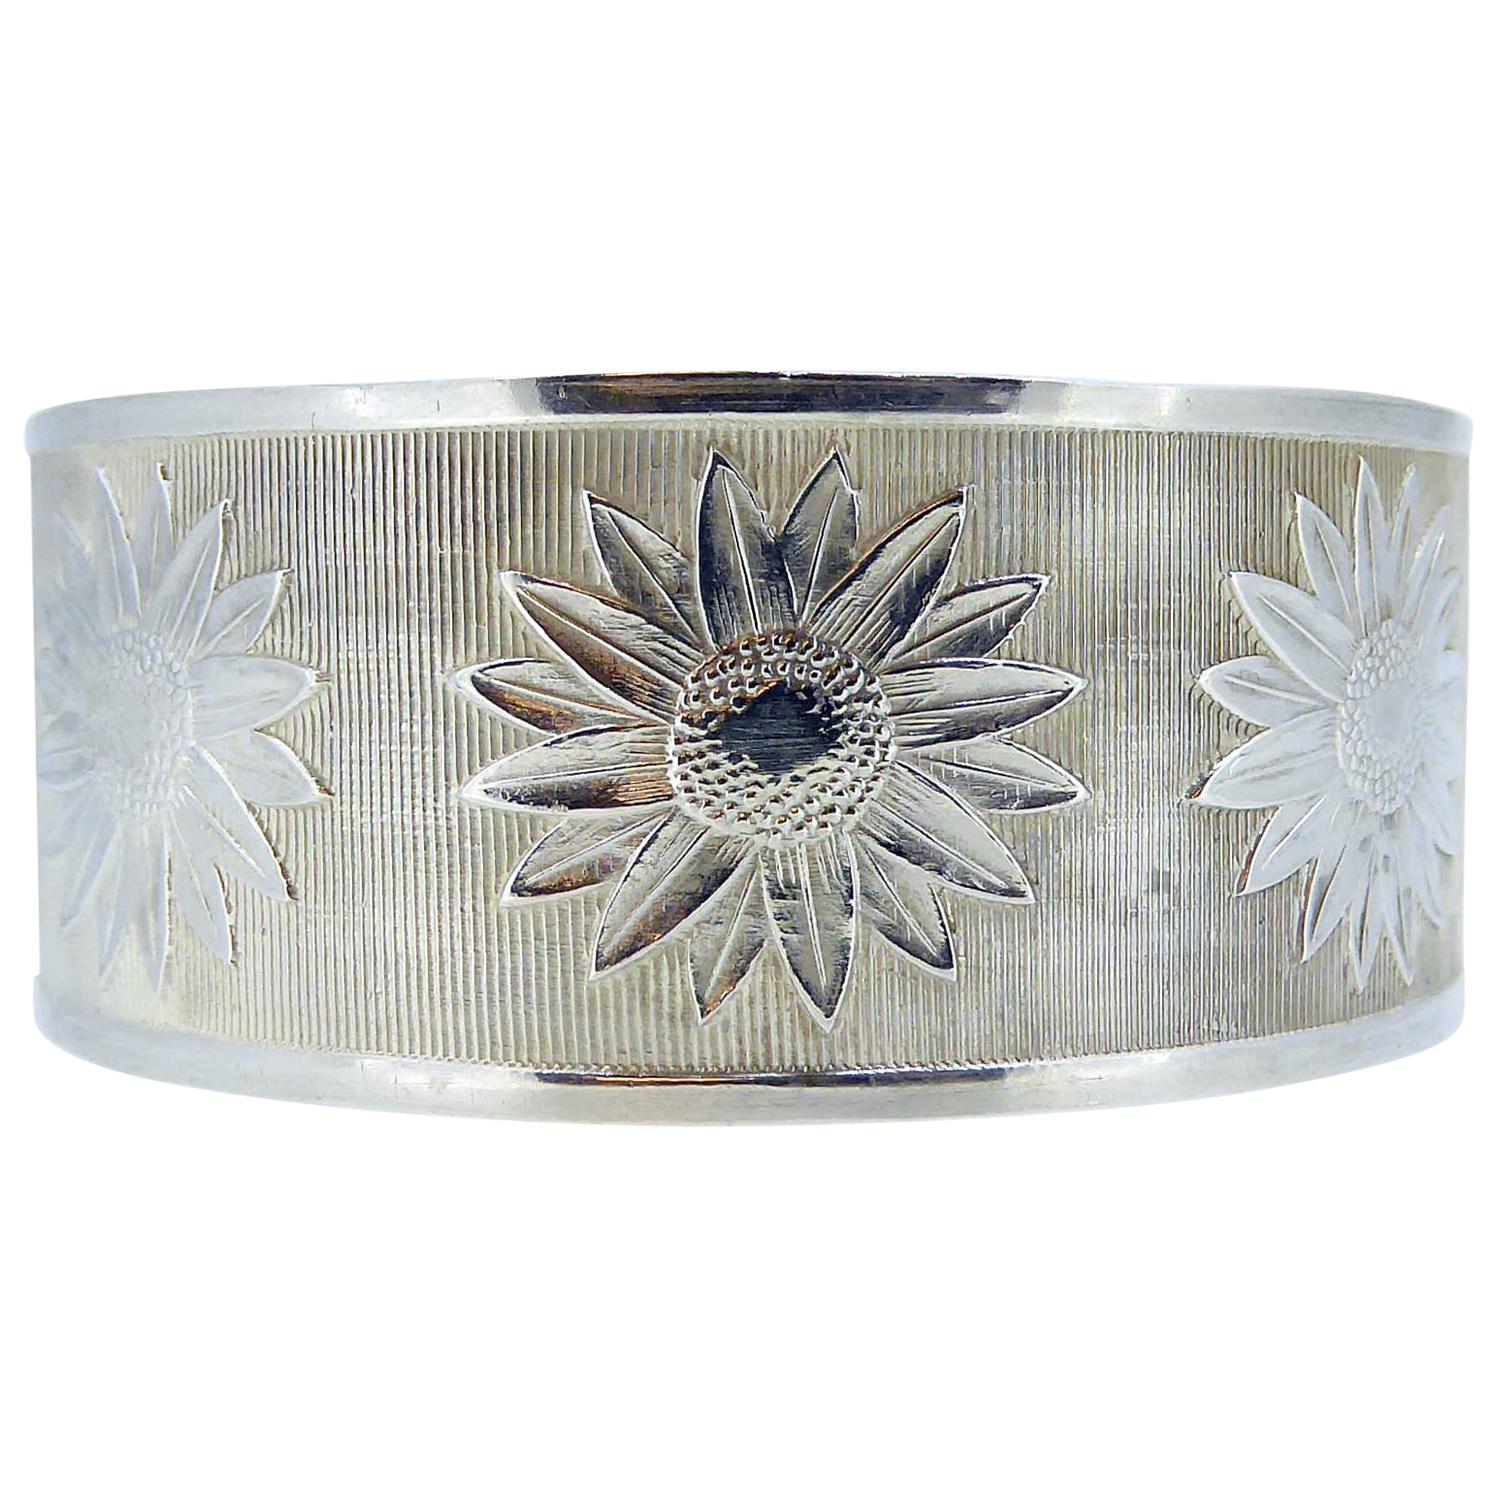 1940s Silver Buckle Bangle, Daisy Flower Pattern, Adjustable, Hallmarked Chester